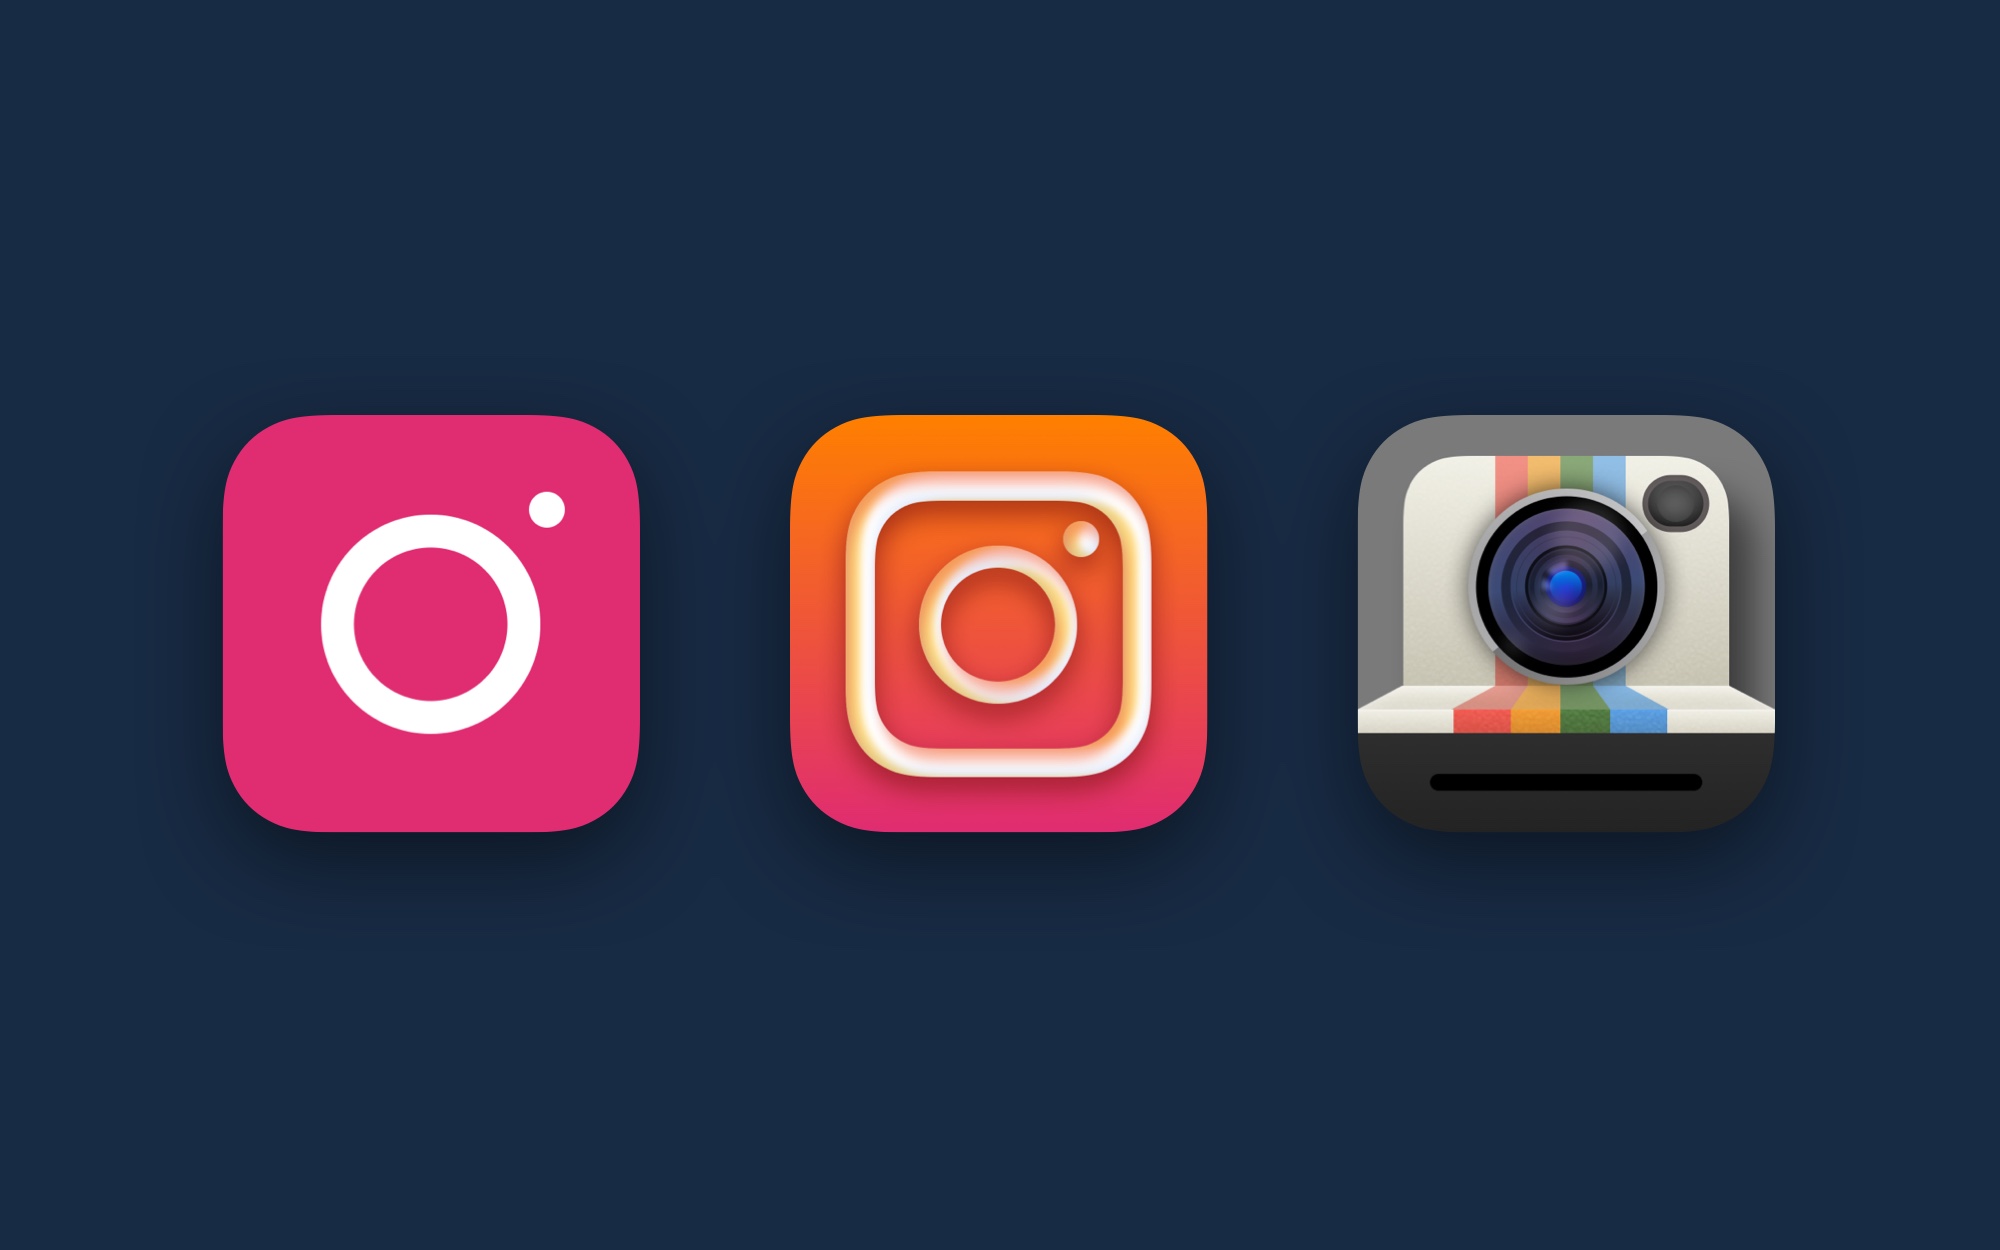 Comparison of the Instagram app icon in abstract, gradient and textured themes.